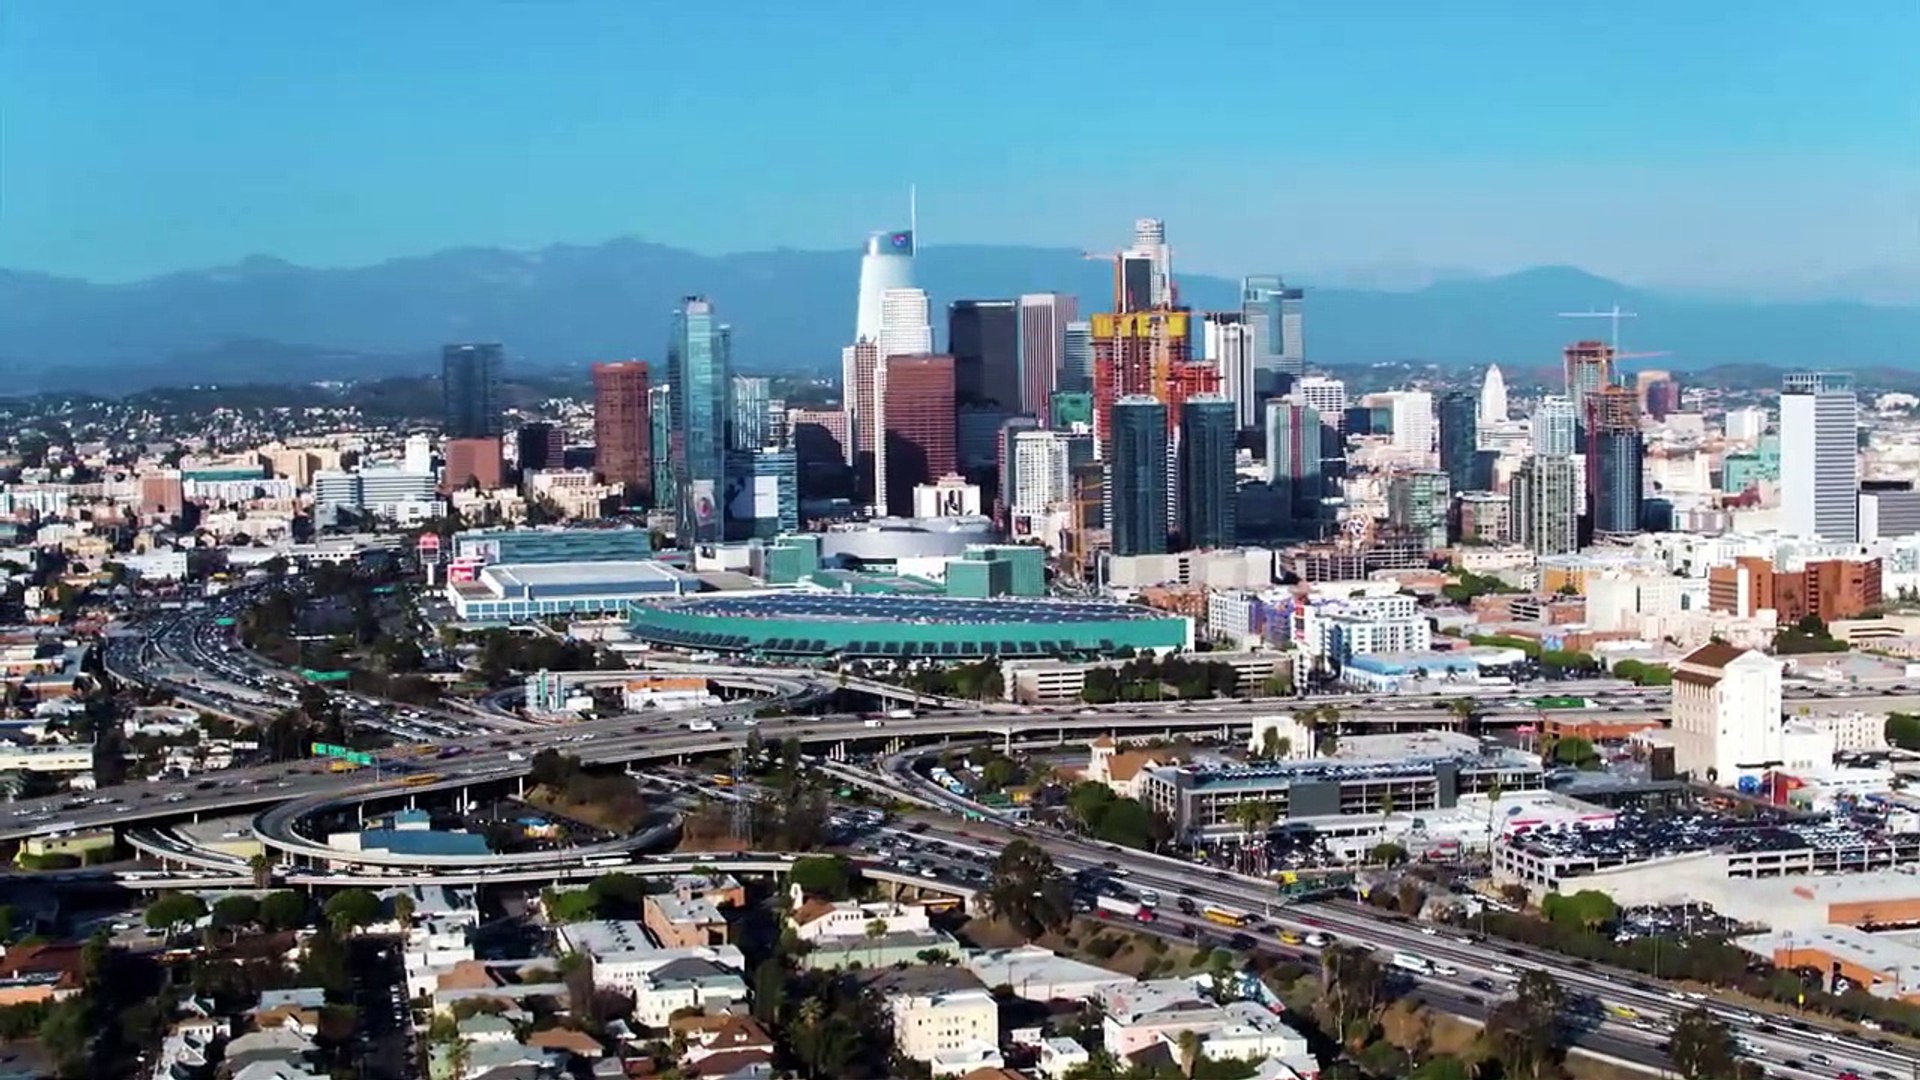 Los Angeles, California in 8K ULTRA HD - The City of Angels